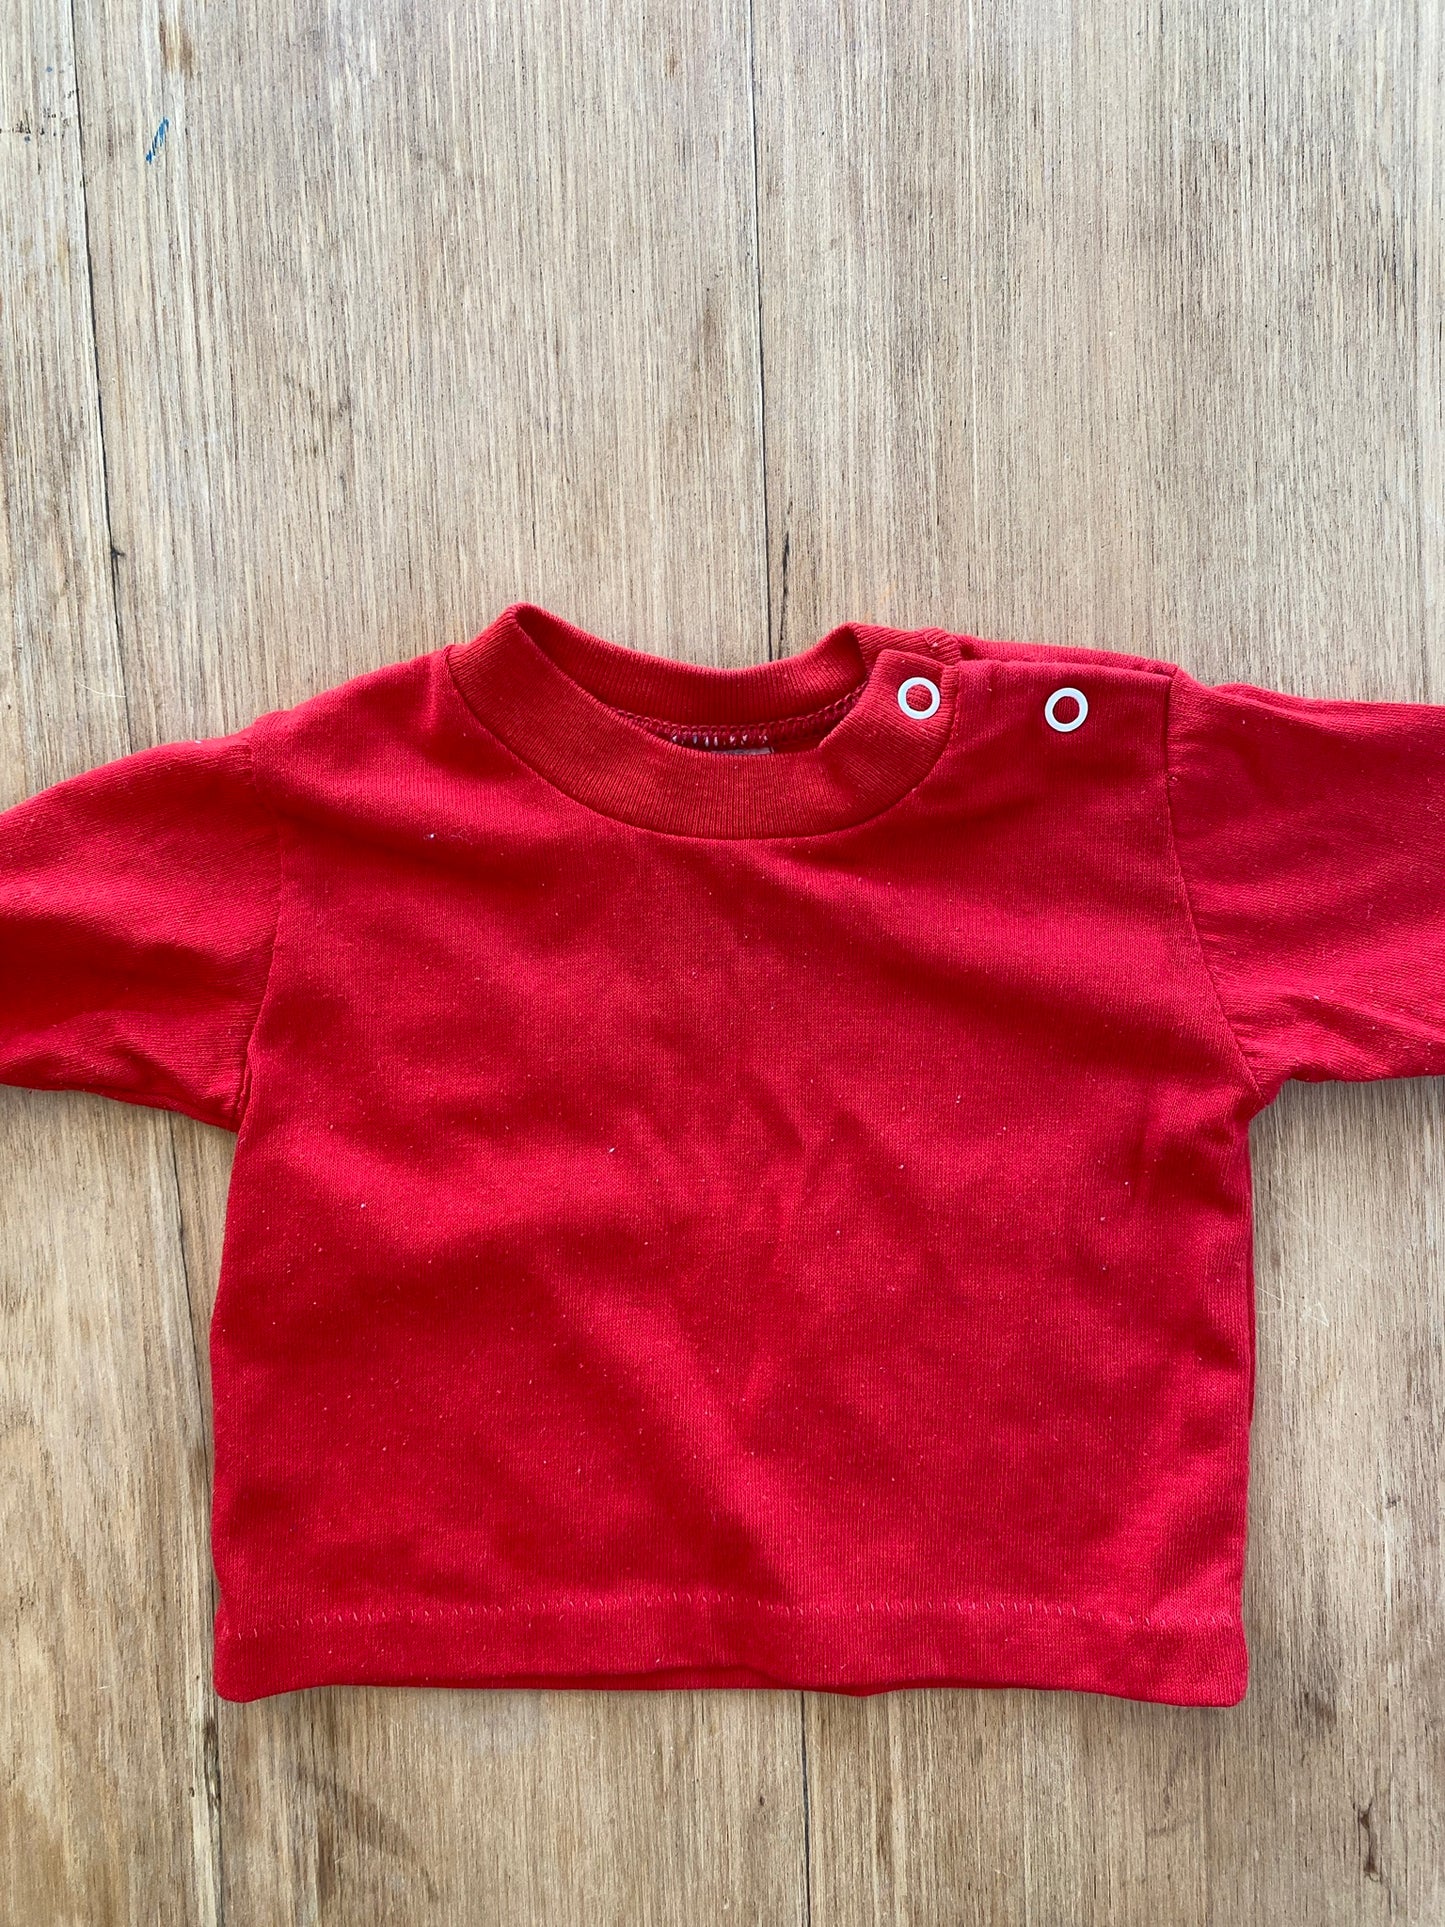 vintage snap baby shirt, 6 months